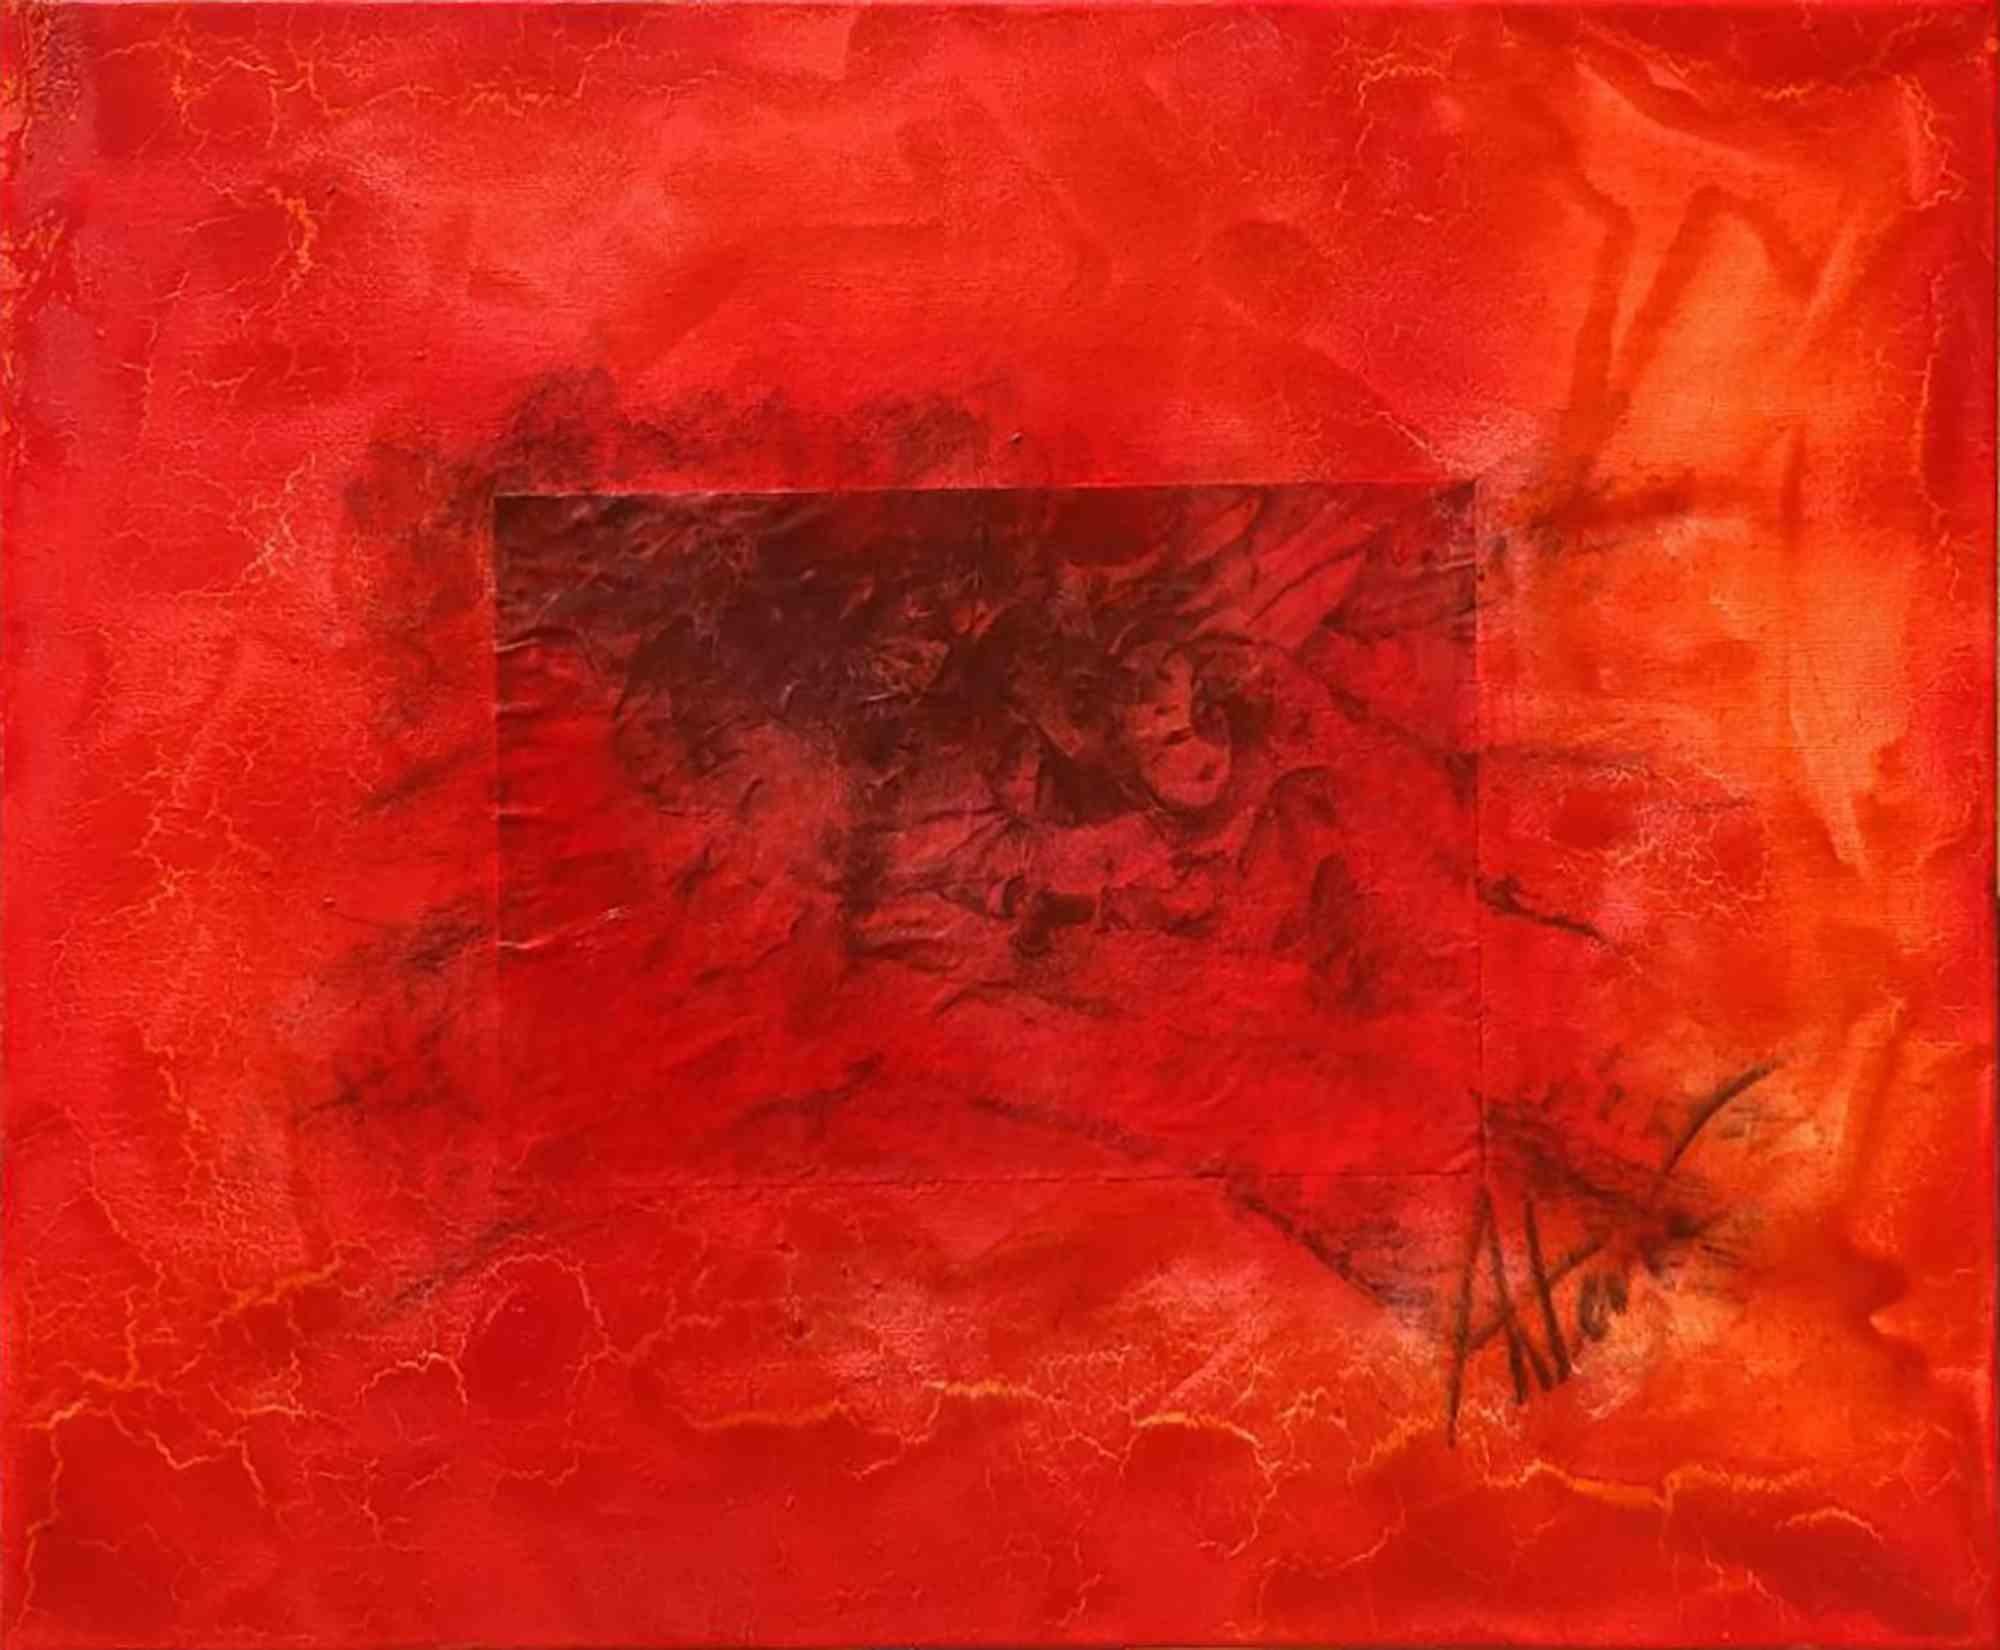 The work is entitled 'Scorci d'infinito red border n.2' and is part of the 'Scorci di infinito' series measuring 80 × 60 cm by the artist Artemio Ceresa. The technique is mixed media on canvas and the signature on the front is Artemio . The work is